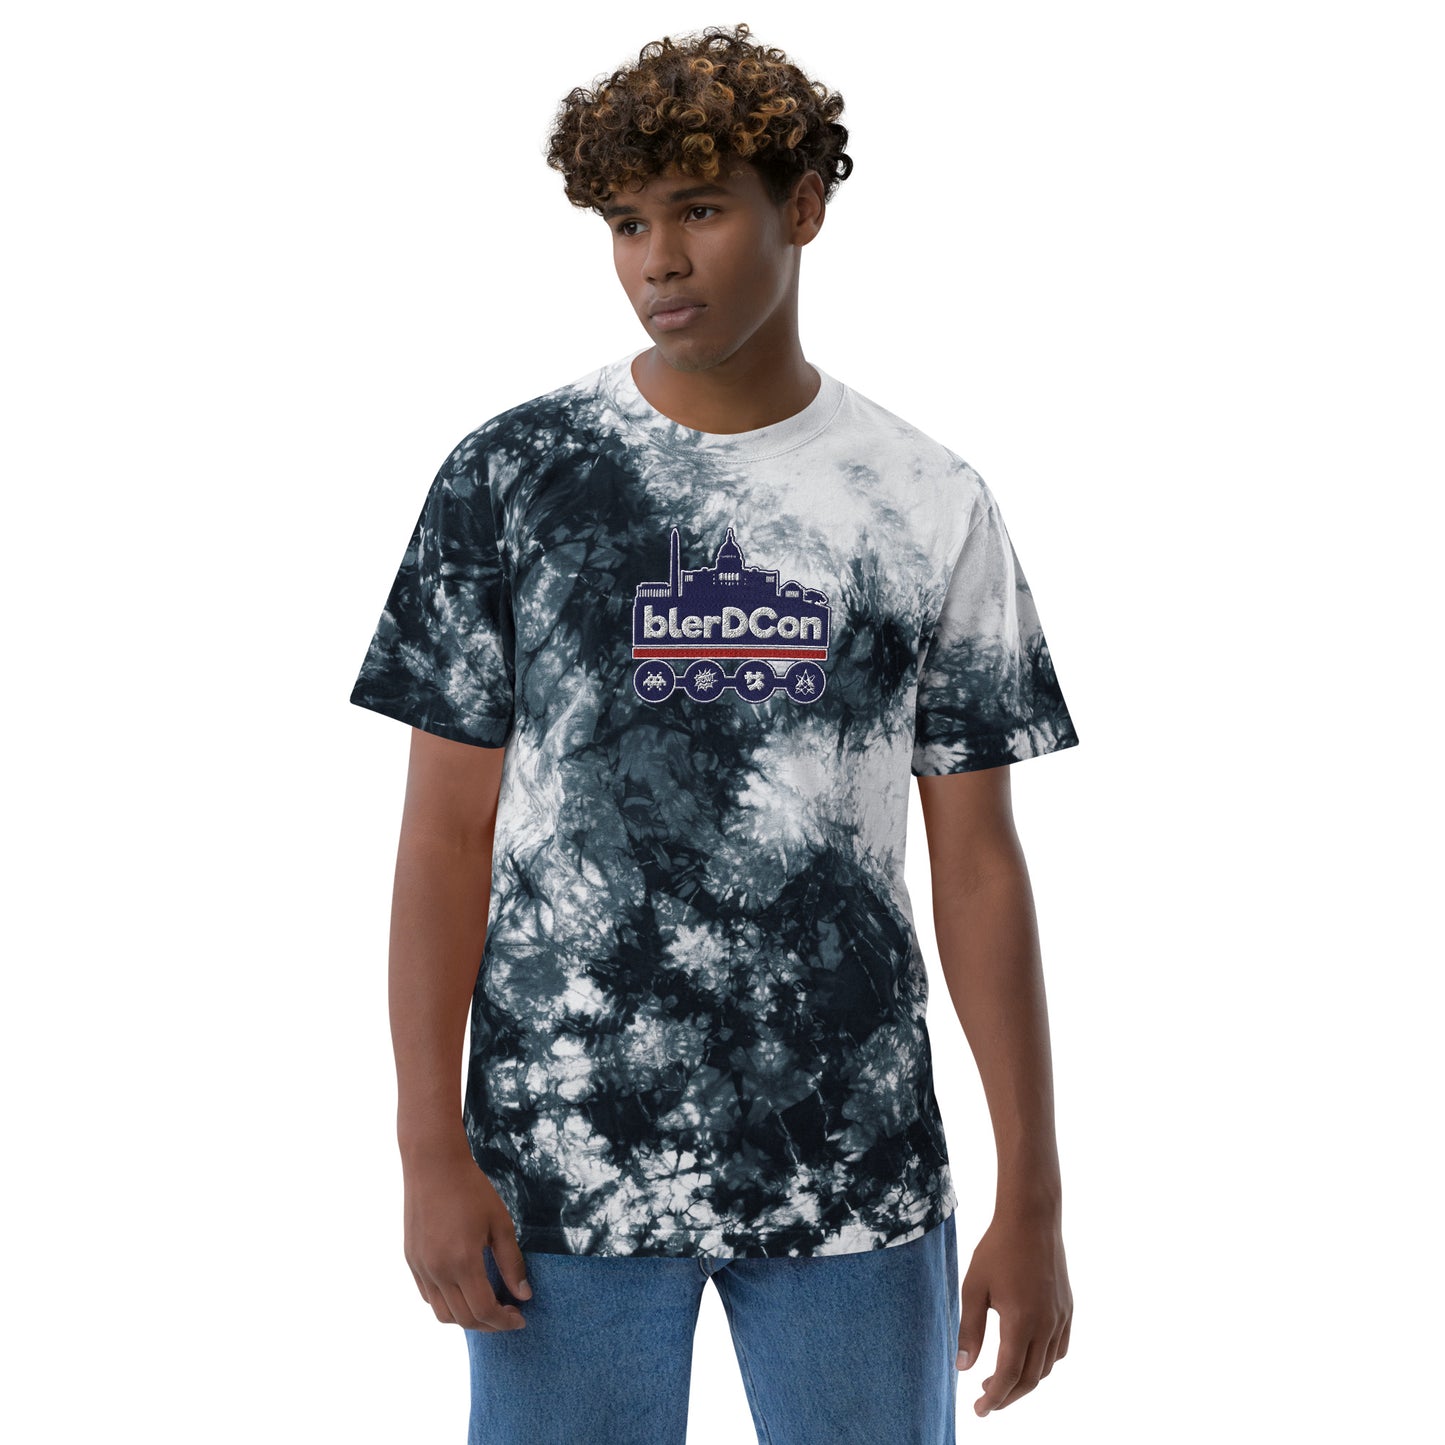 Blerd Con Embroidered Oversized tie-dye t-shirt